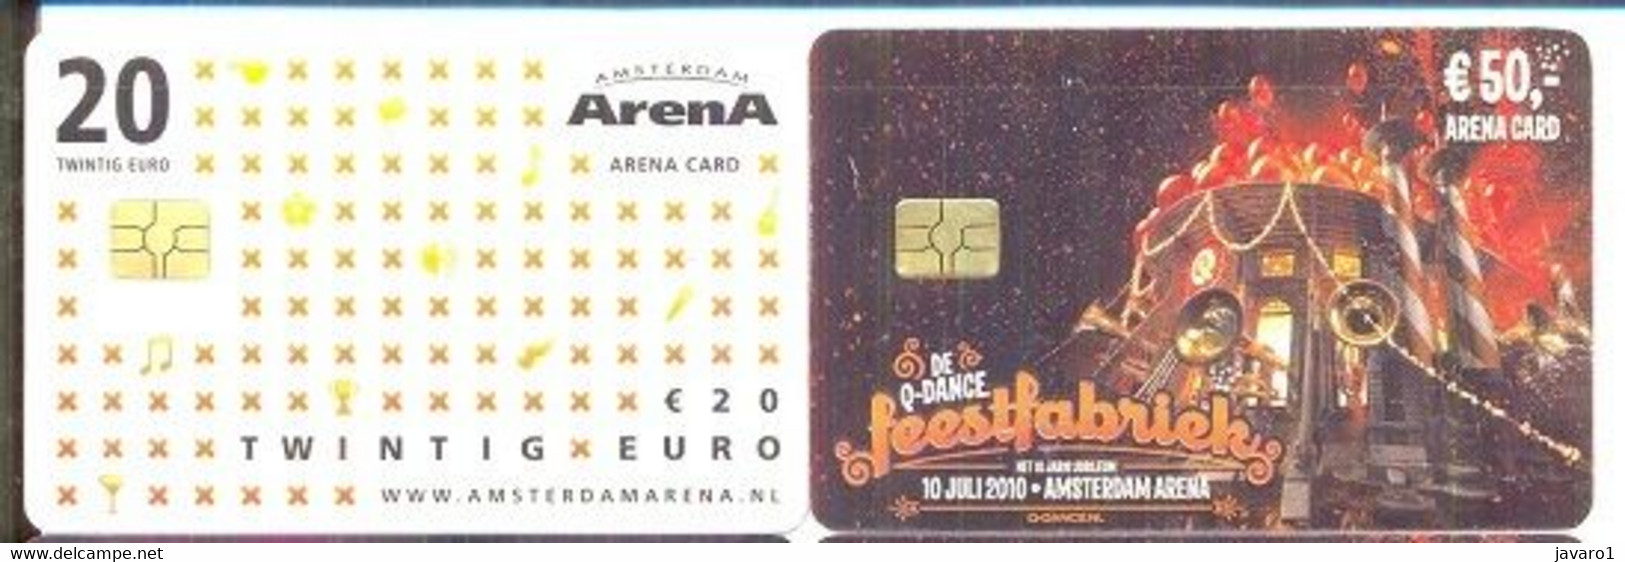 ARENA CARD : 2 Cards As Pictured - A Identifier